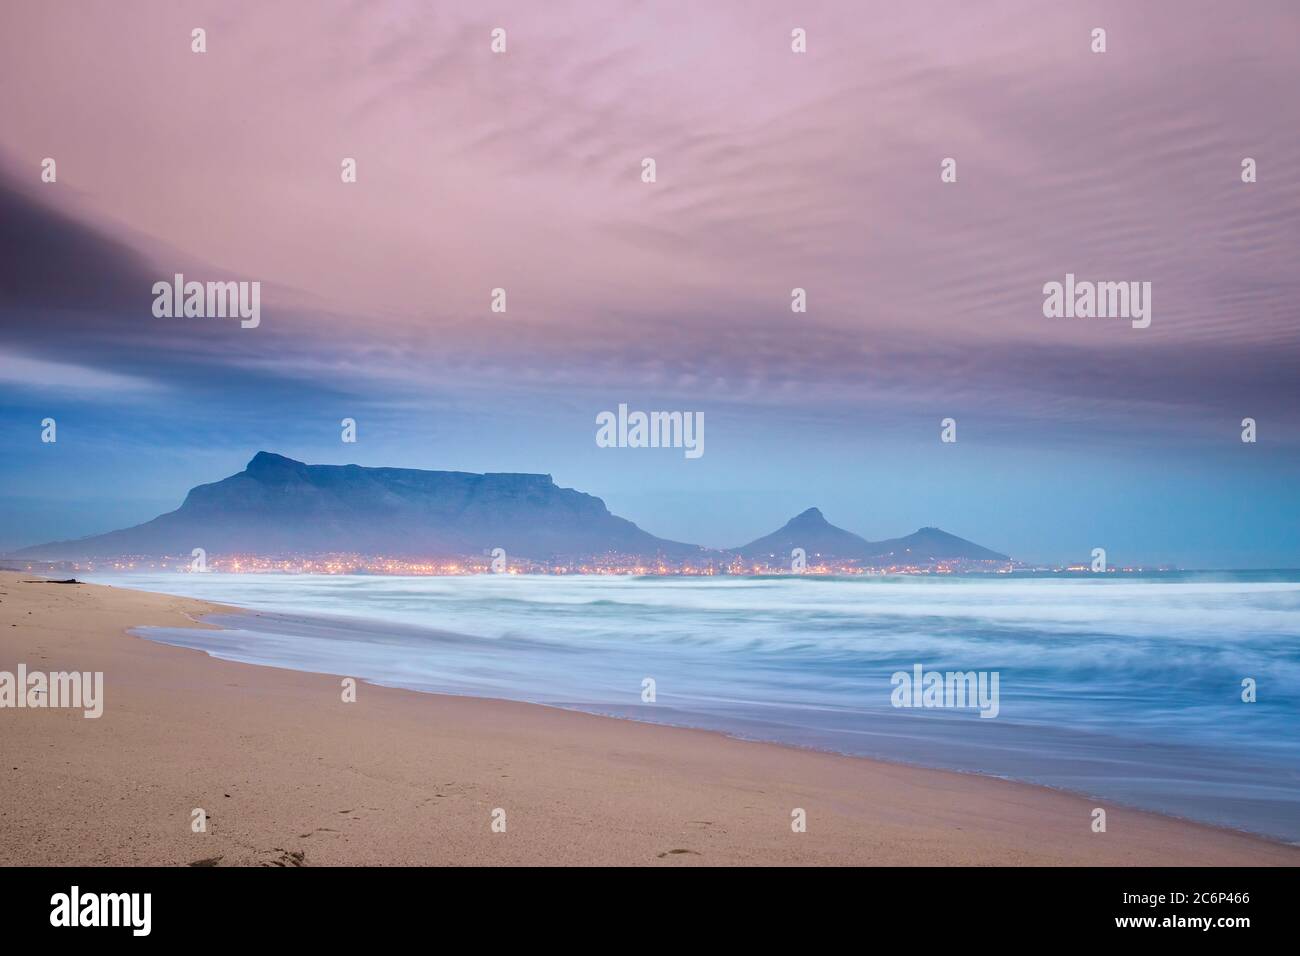 View of Table Mountain at sunrise, Cape Town, South Africa from Milnerton Beach coastline Stock Photo